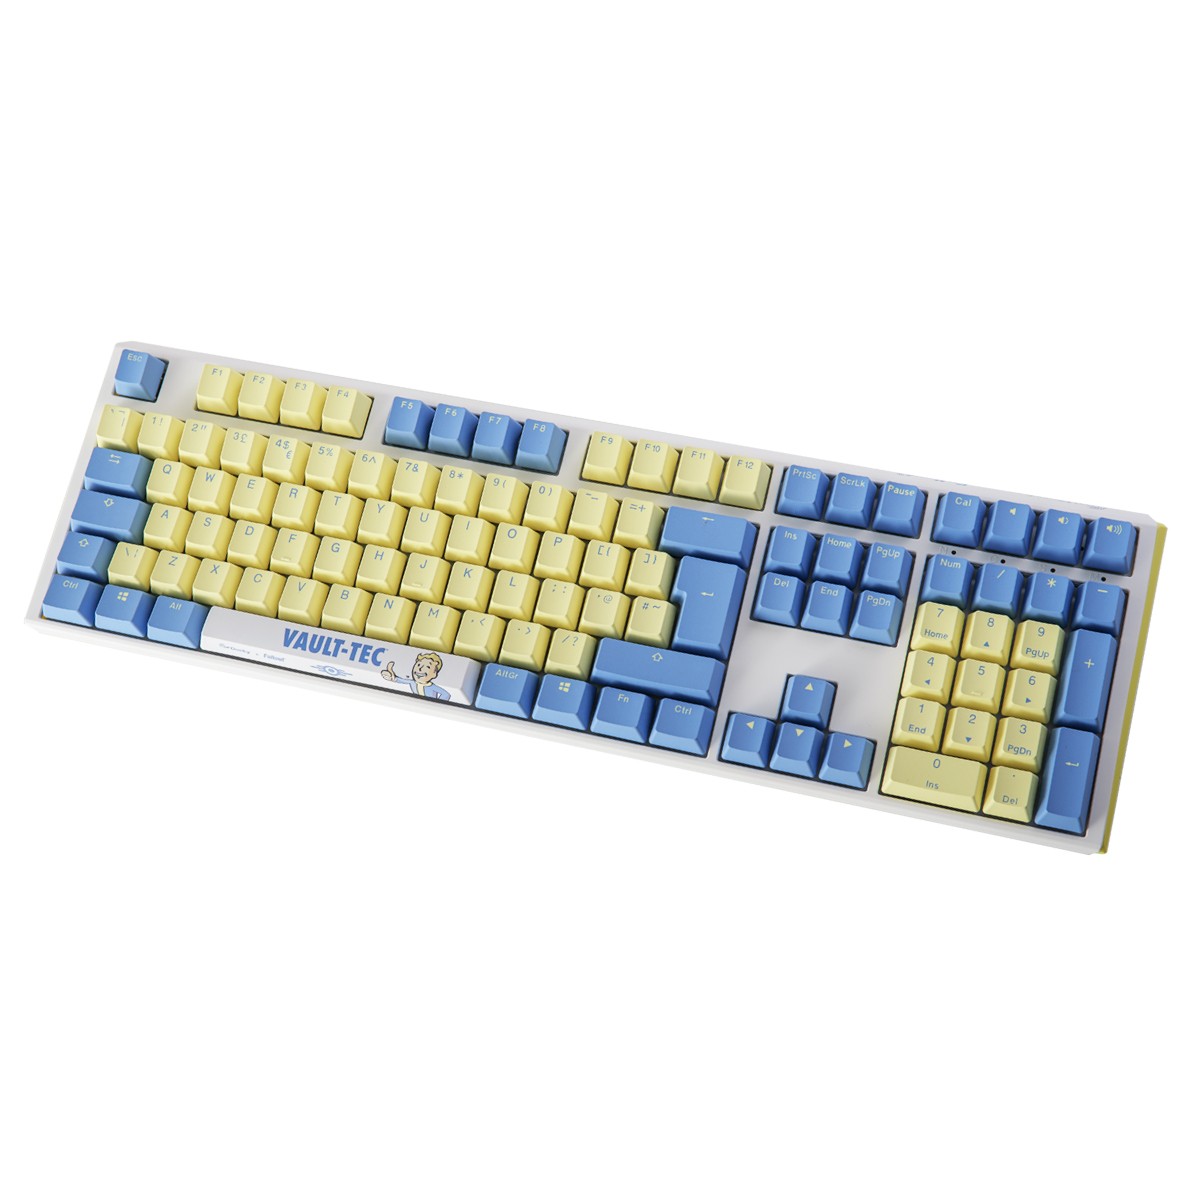 Ducky - Ducky x Fallout One 3 RGB LE Cherry Red Switch Mechanical Gaming Keyboard UK Layout